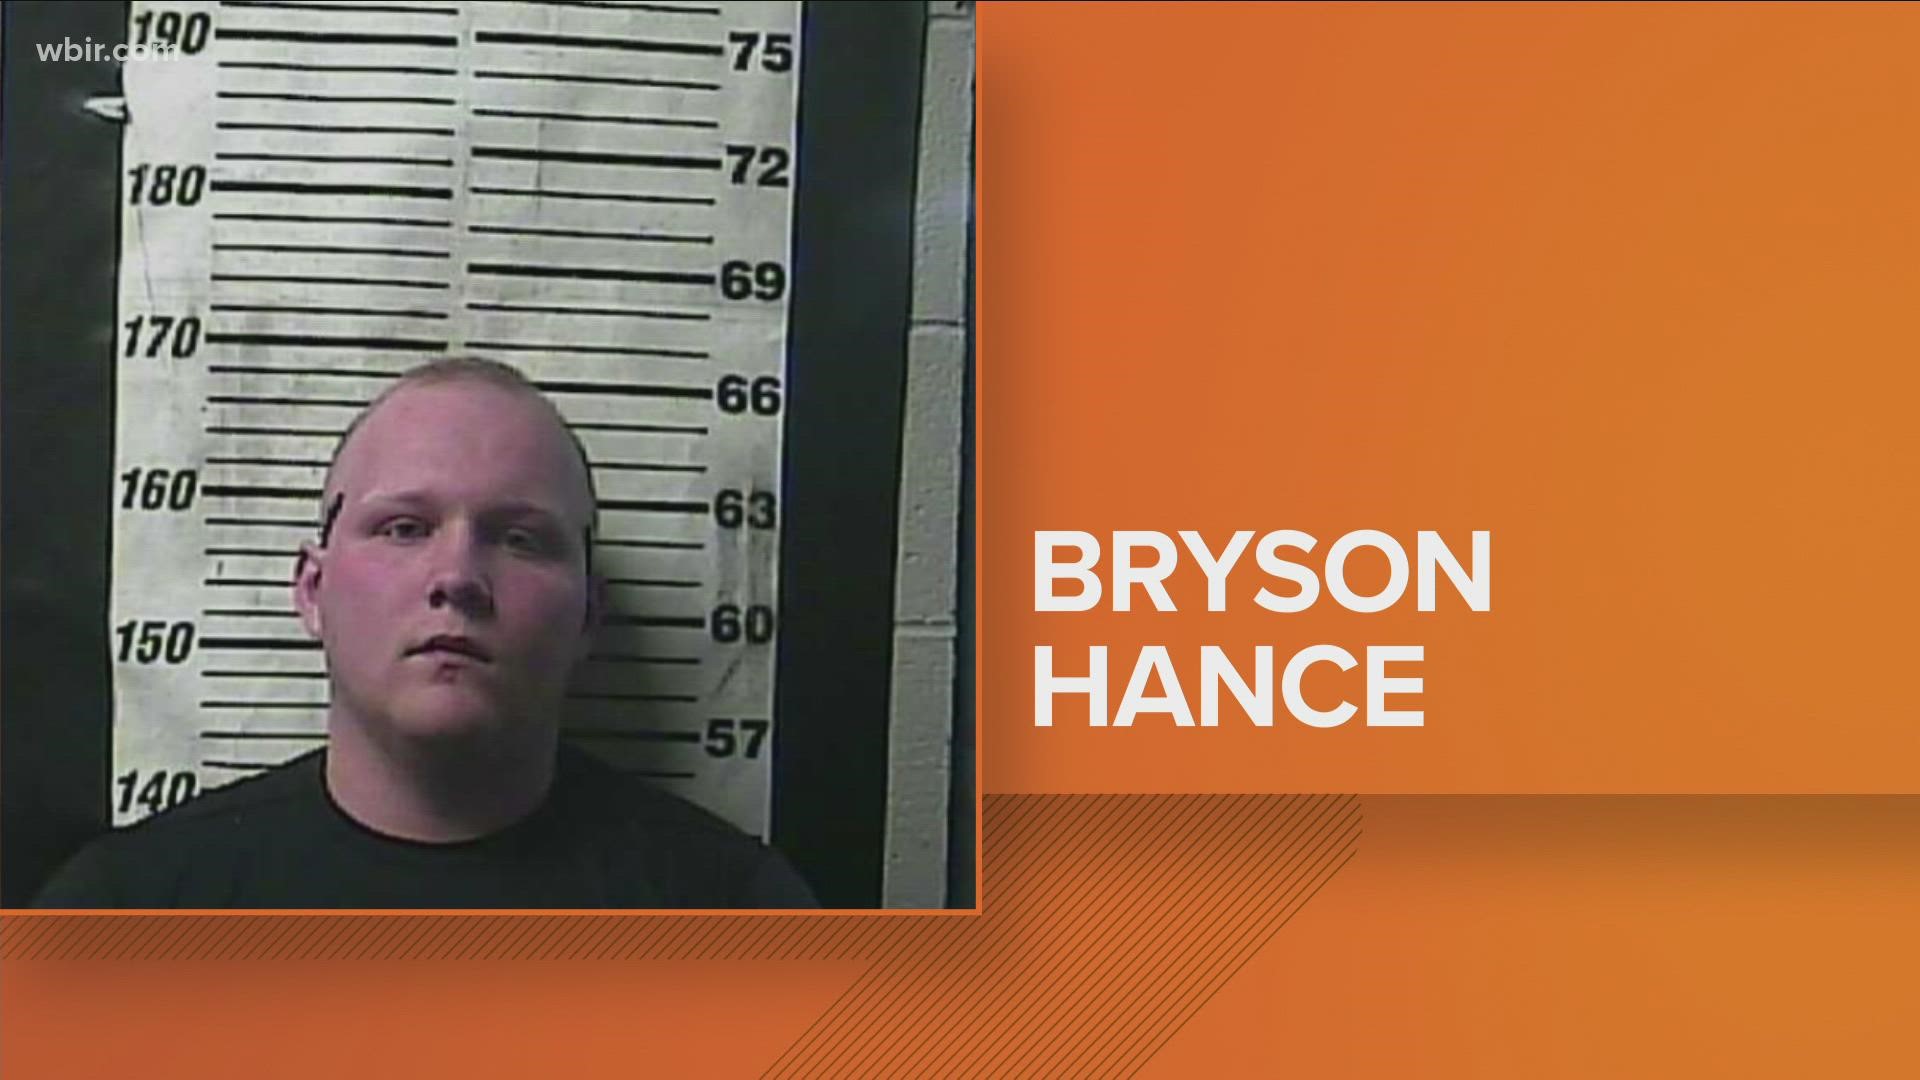 Police say Officer Bryson Hance got into an argument with an inmate being processed.